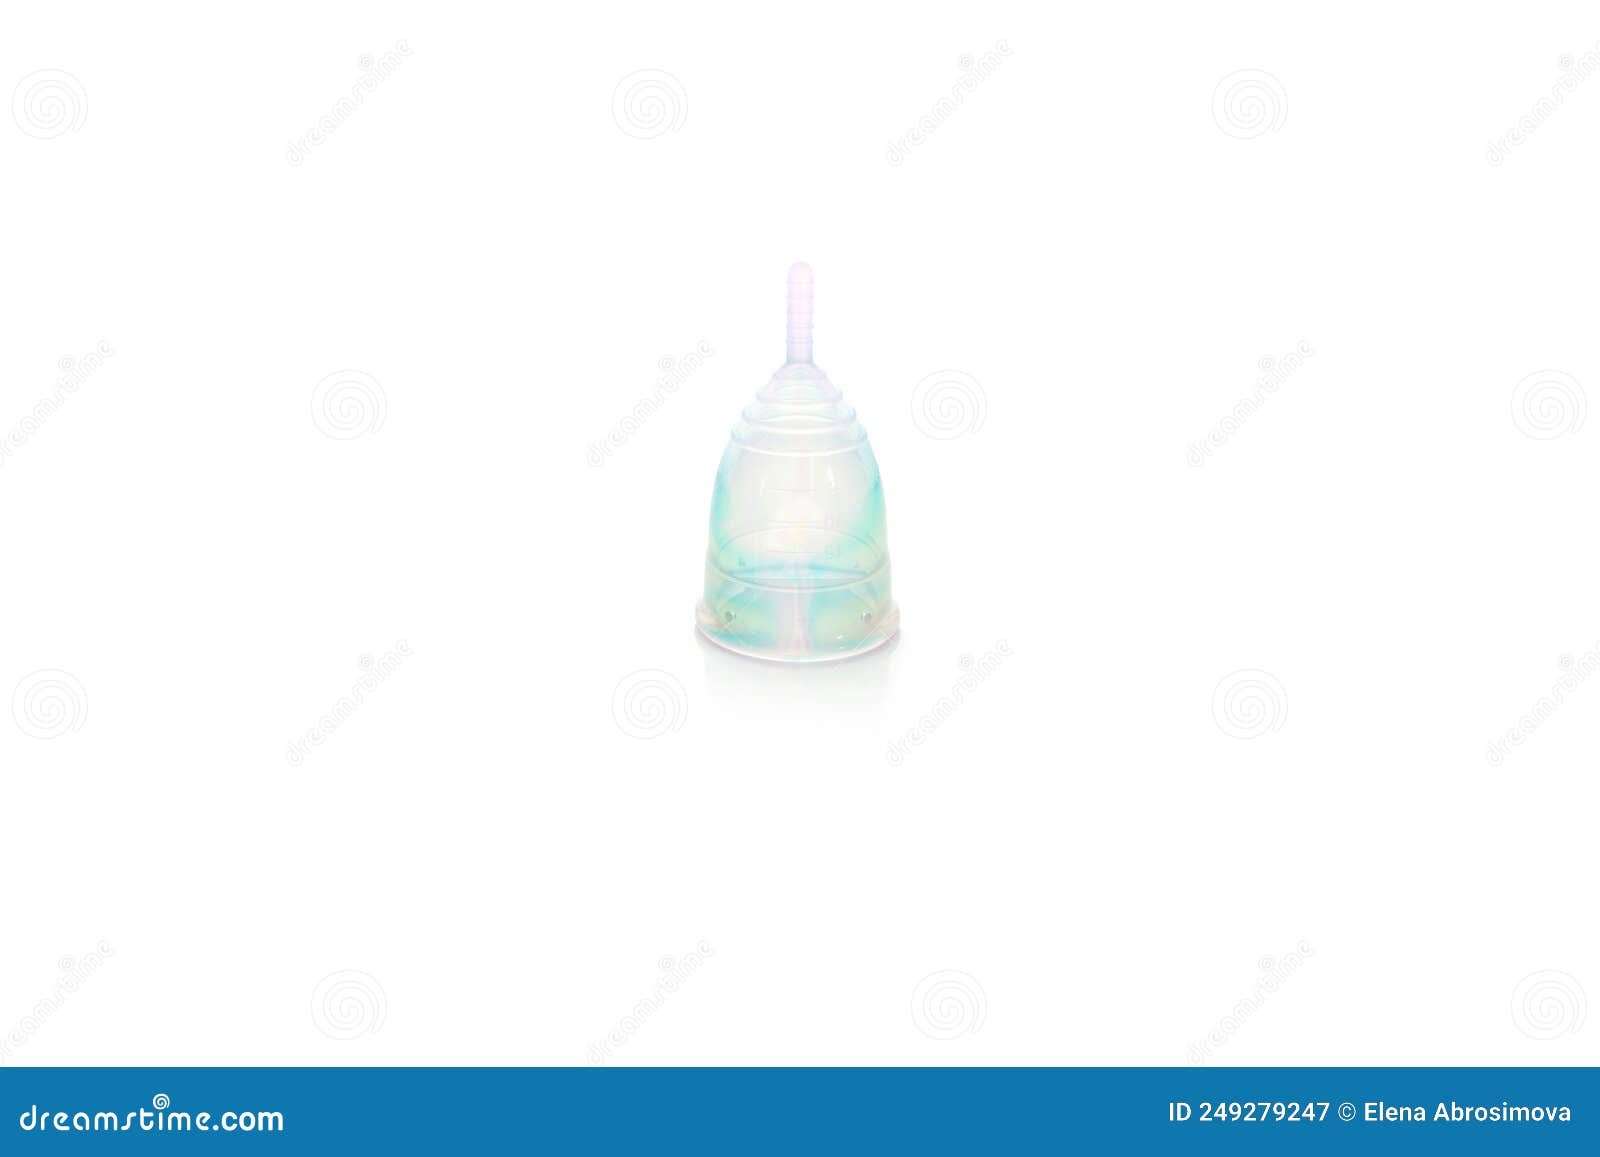 menstrual collector, rainbow colors, women hygienic period cup